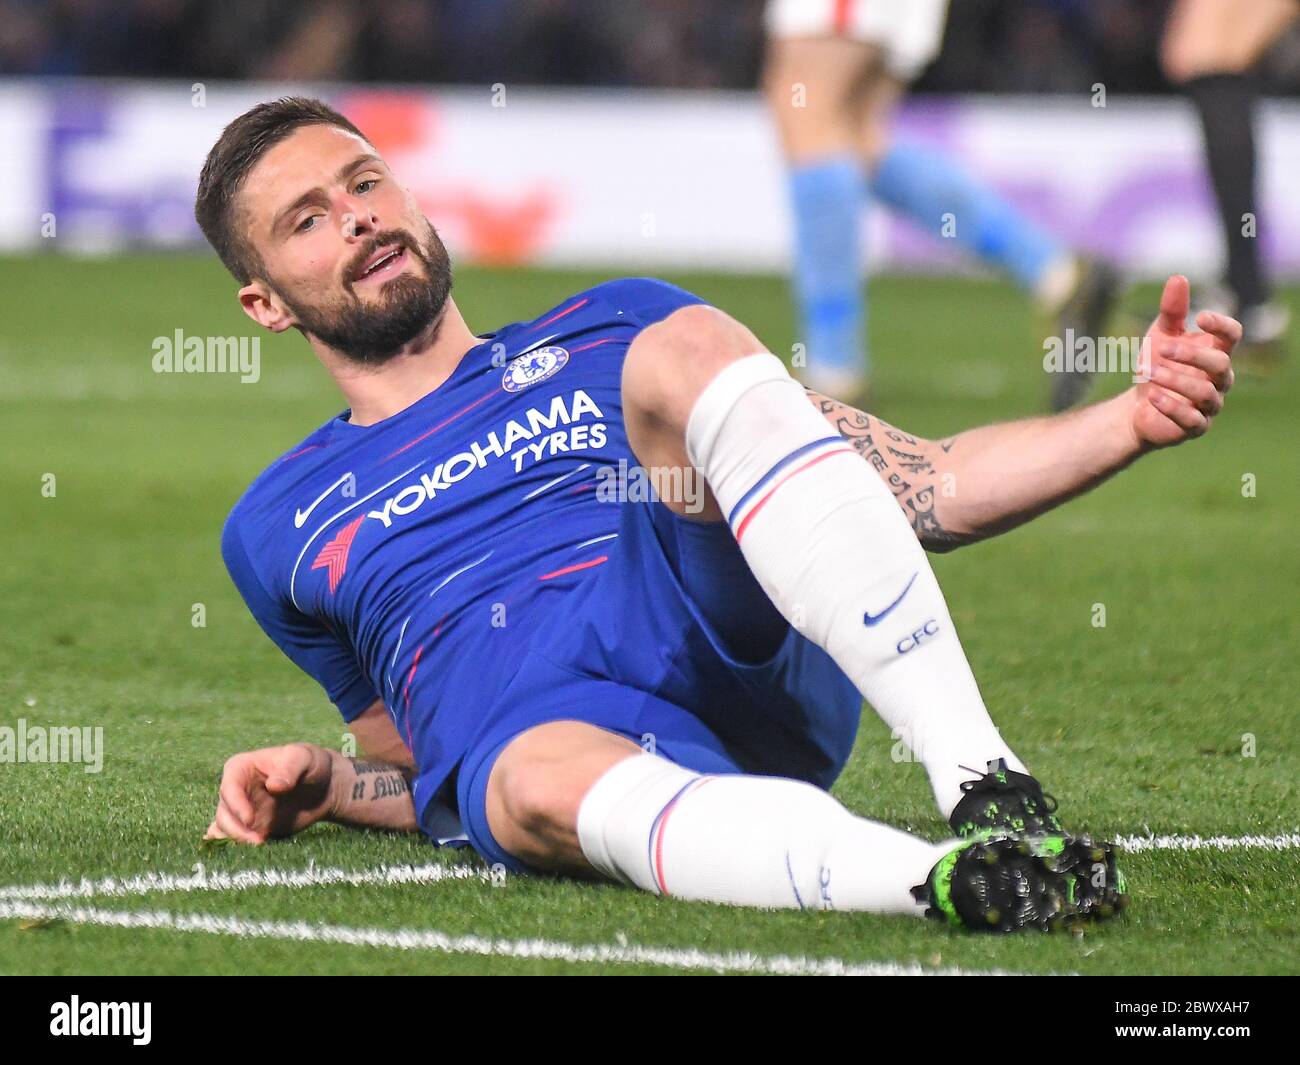 LONDON, ENGLAND - APRIL 18, 2019: Olivier Giroud of Chelsea pictured during the second leg of the 2018/19 UEFA Europa League Quarter-Finals game between Chelsea FC (England) and SK Slavia Praha (Czech Republic) at Stamford Bridge. Stock Photo